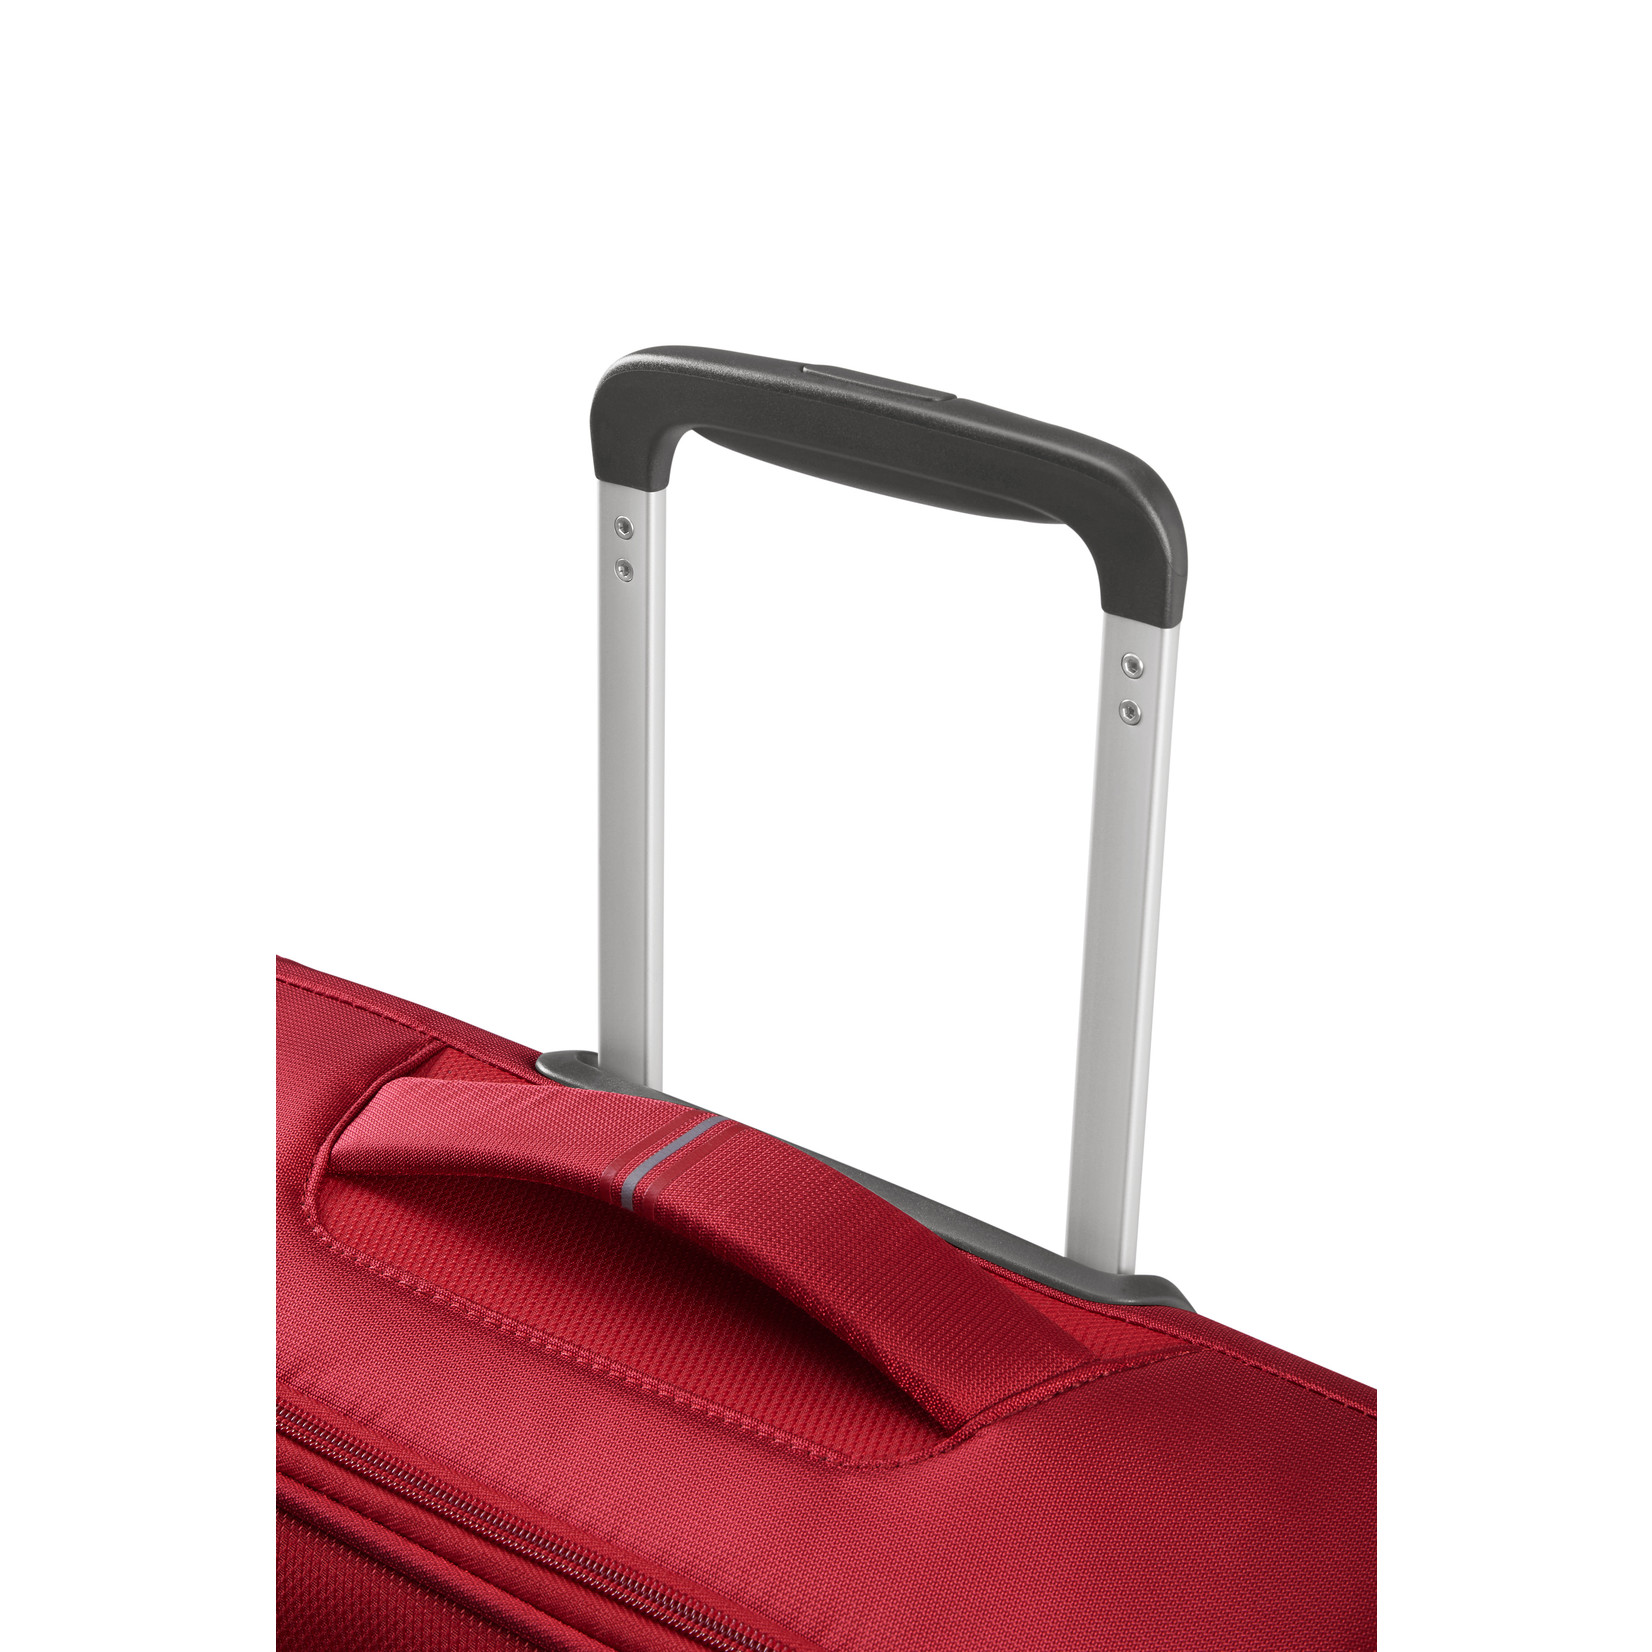 American Tourister American Tourister Crosstrack spinner 55 - red/grey